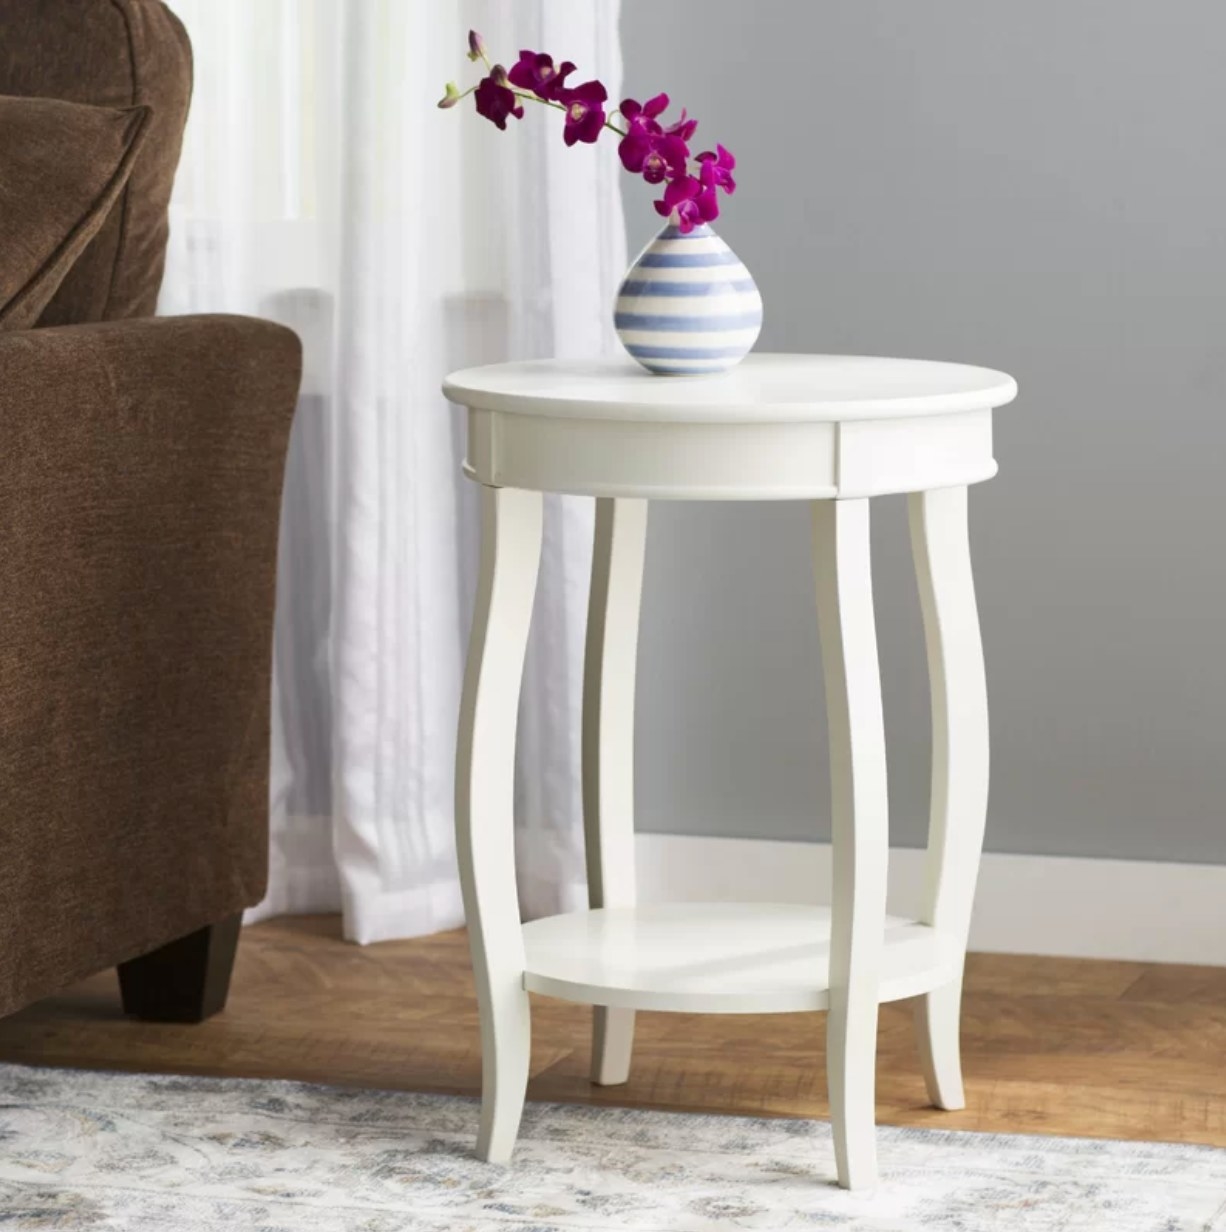 The side table in white being used as a vase holder